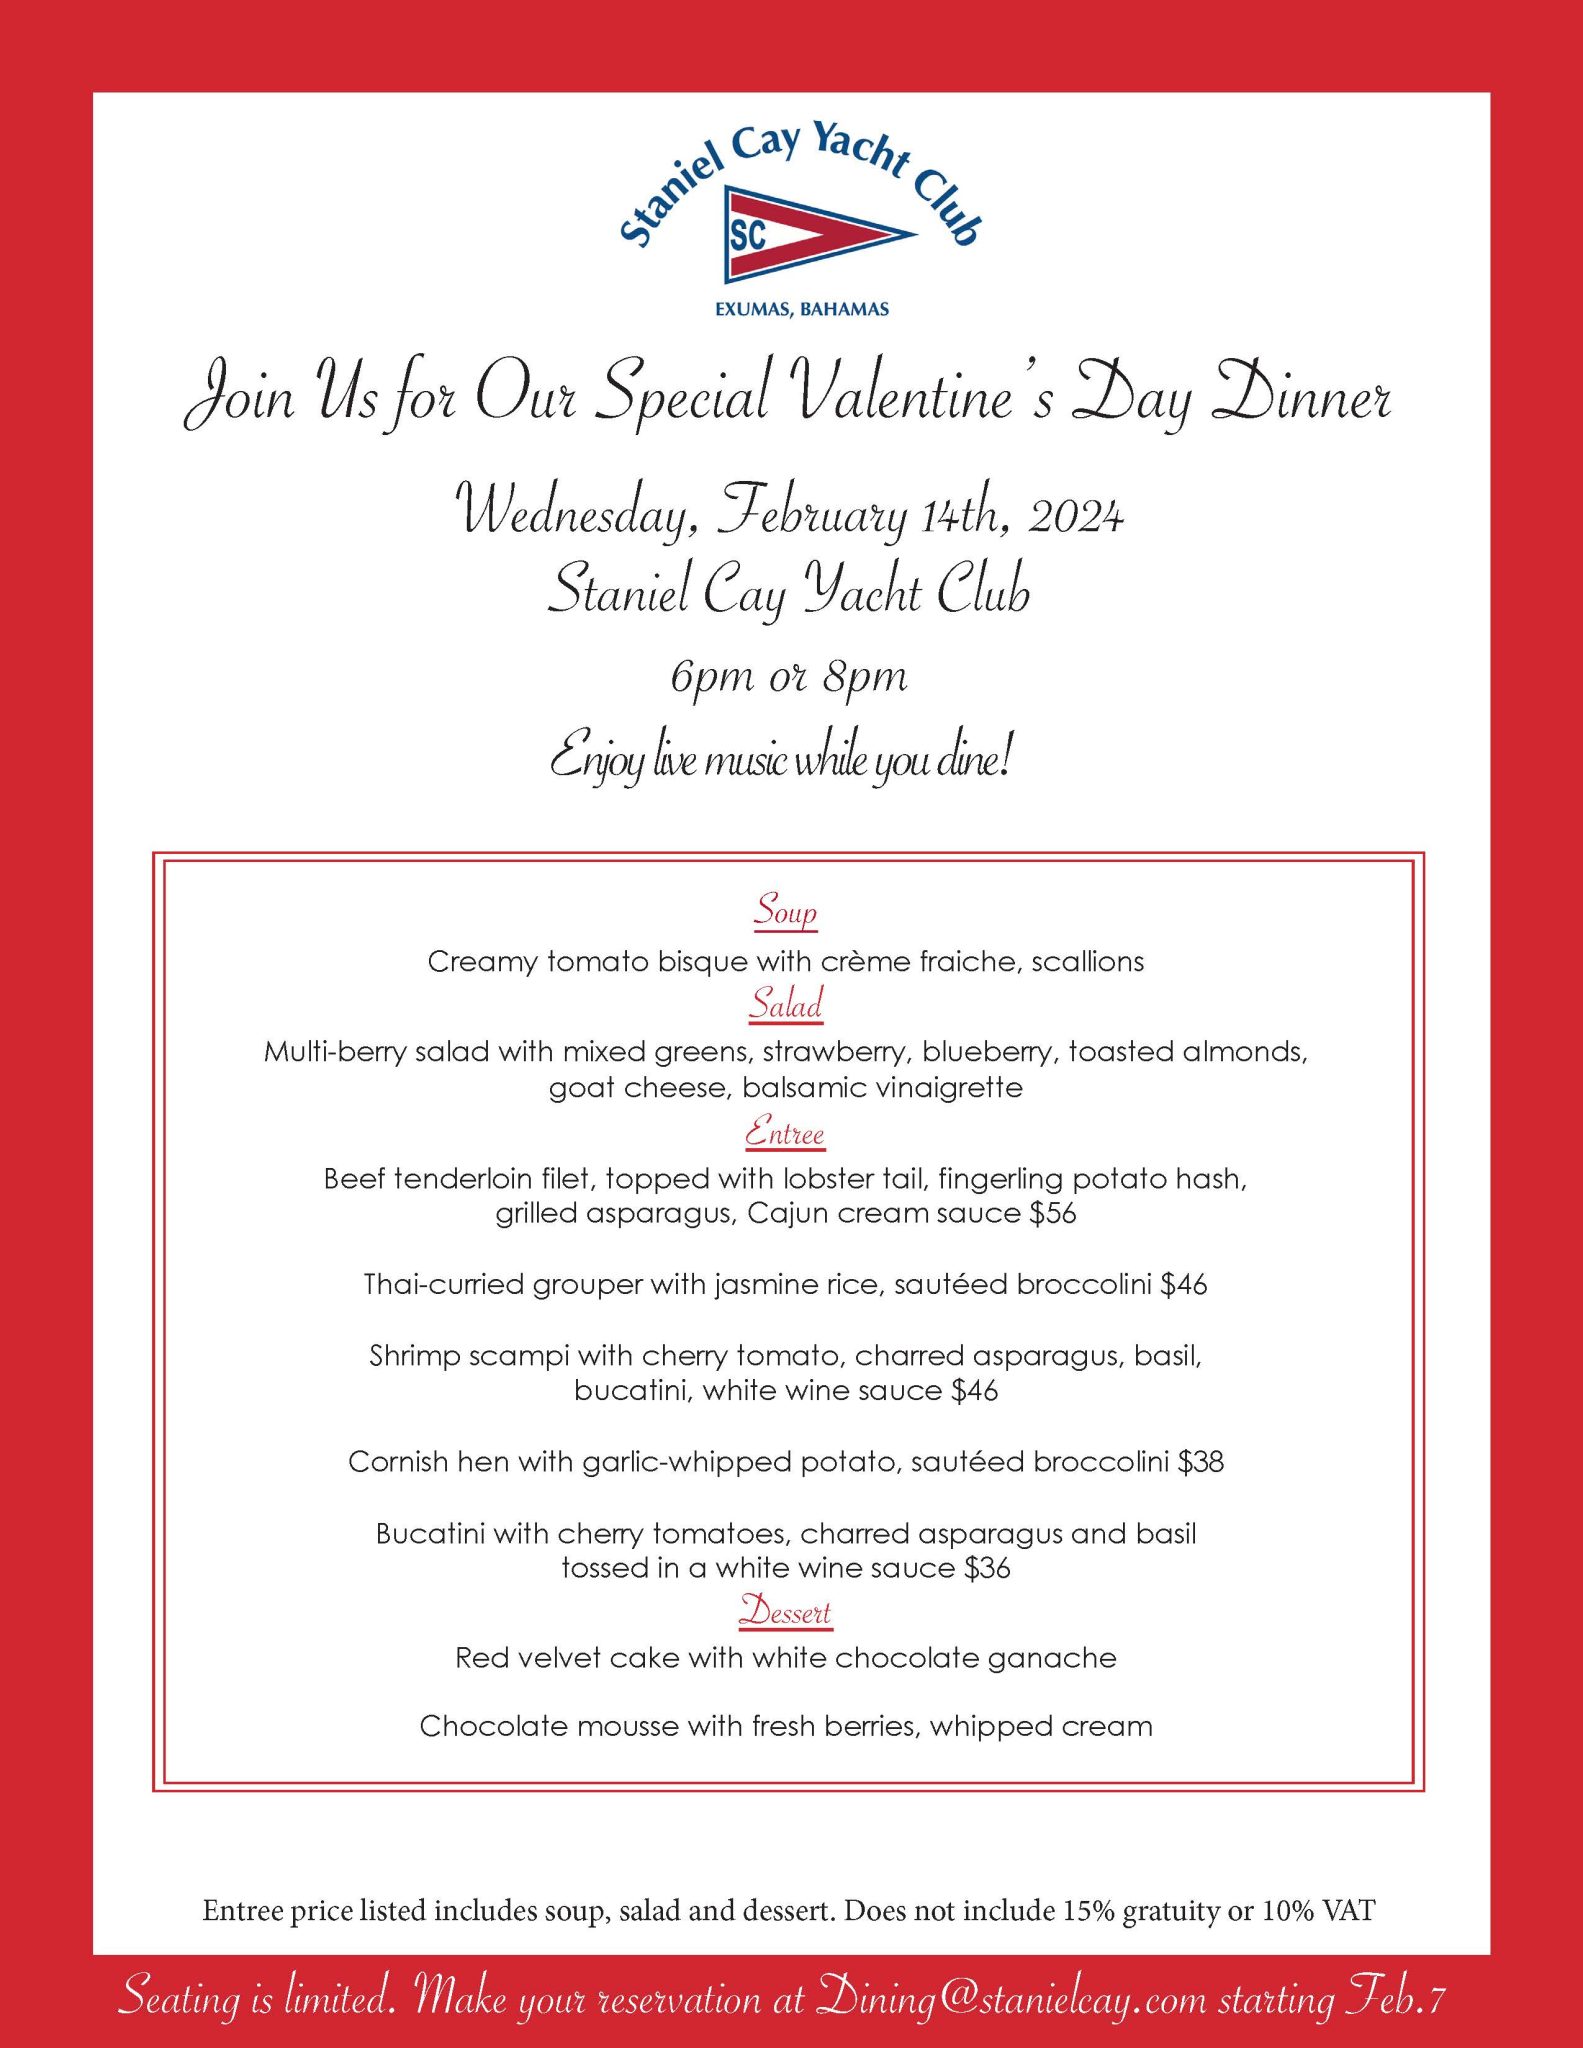 Valentines Day at The Staniel Cay Yacht Club